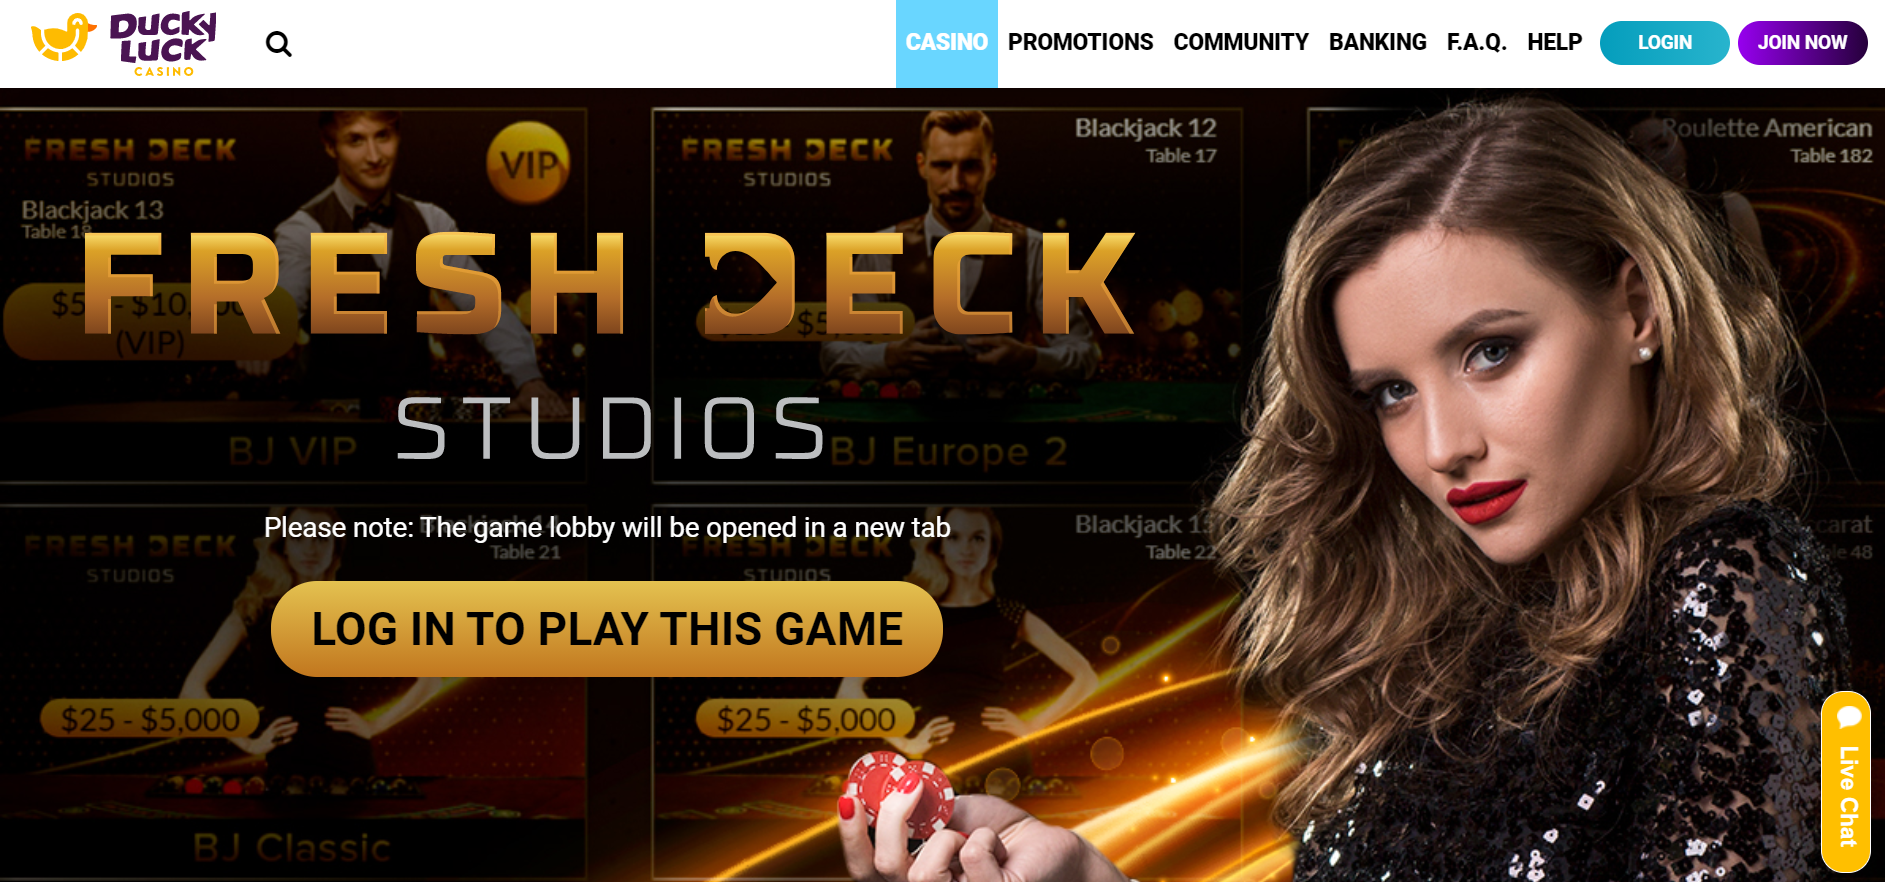 Are You Struggling With online casino for canadian players? Let's Chat